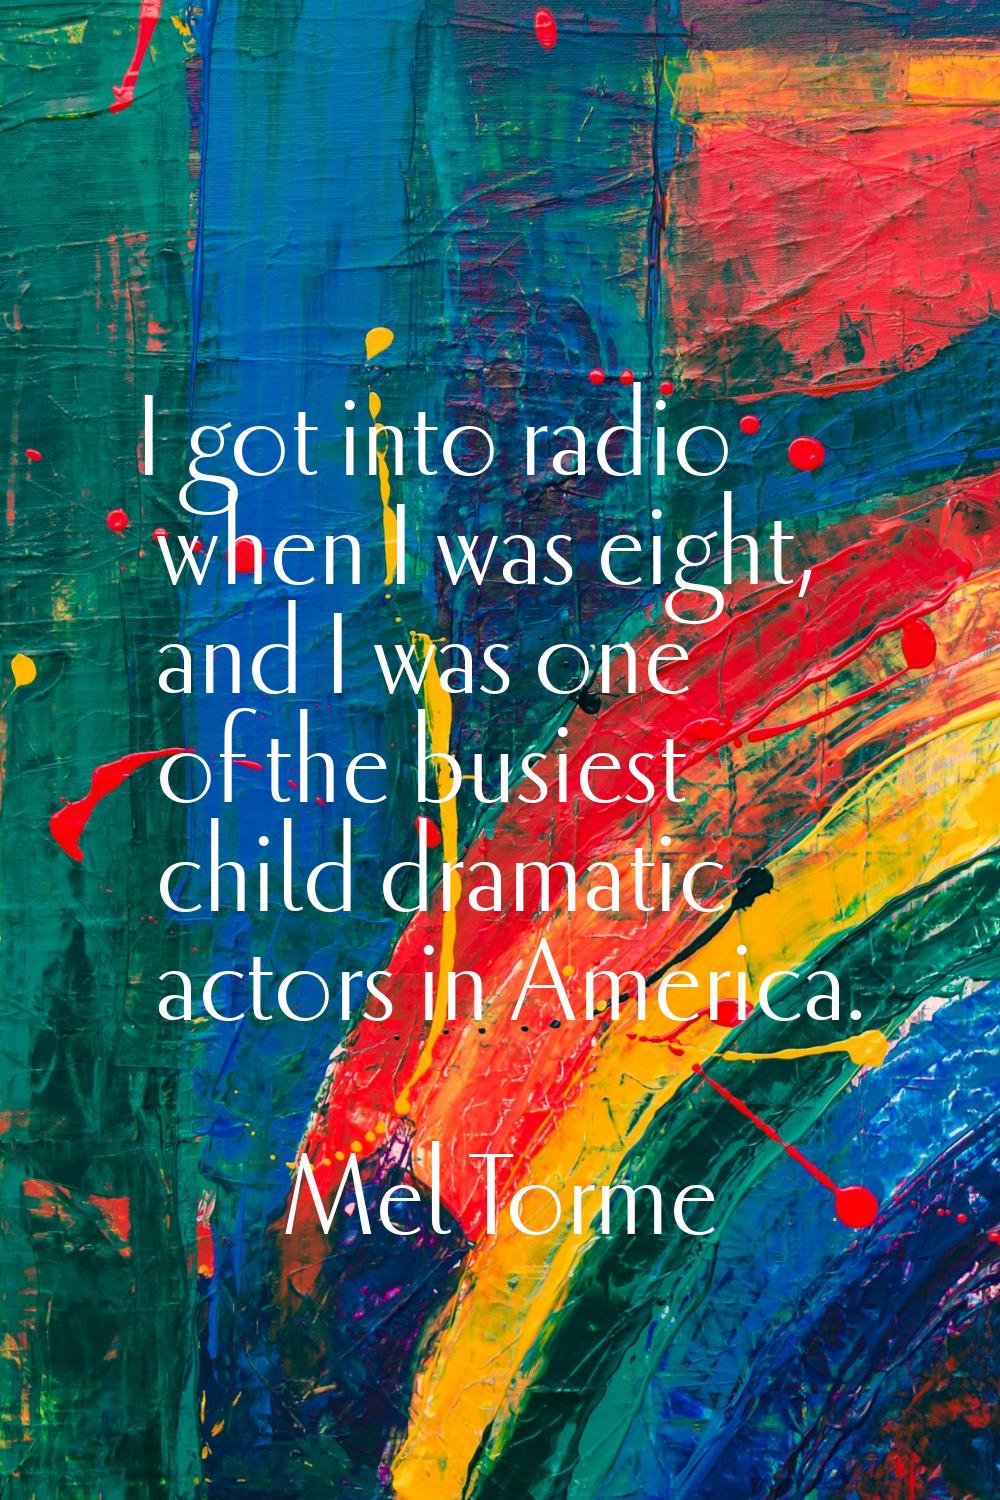 I got into radio when I was eight, and I was one of the busiest child dramatic actors in America.